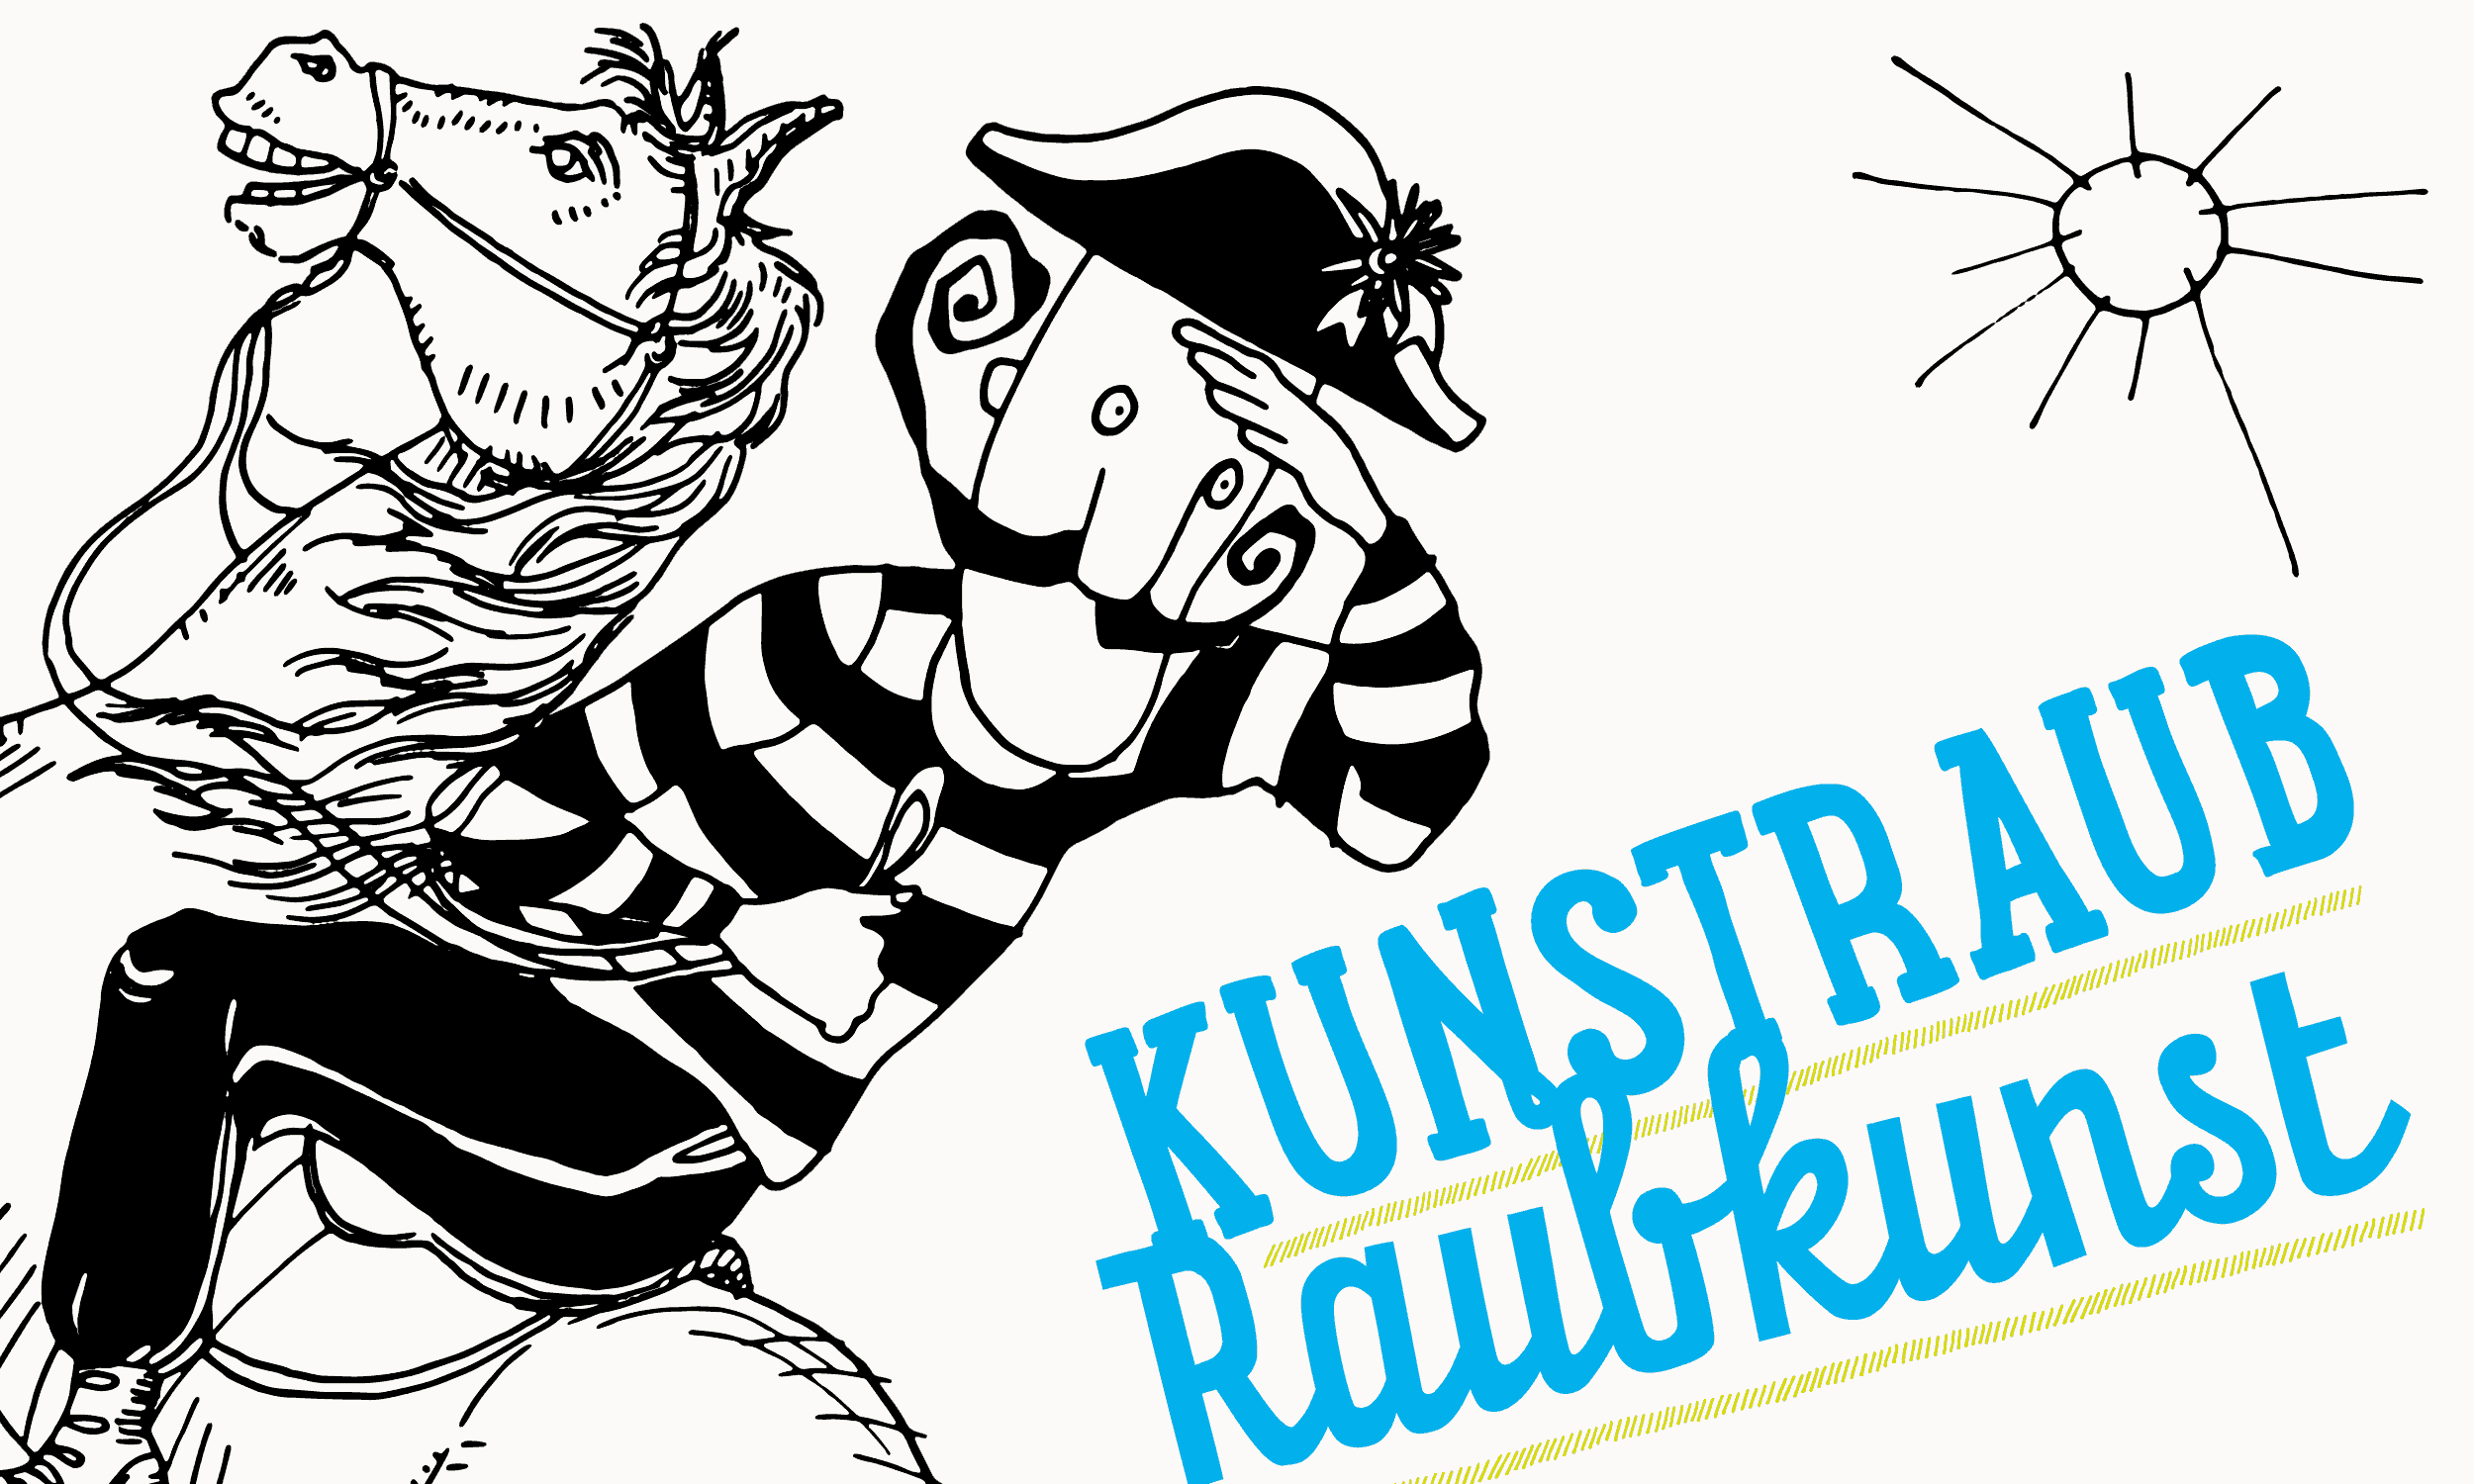 Illustration for the temporary exhibition "Kunstraub/Raubkunst"; the figure Kurti with Napoleon hat on a horse, to the right of it the lettering